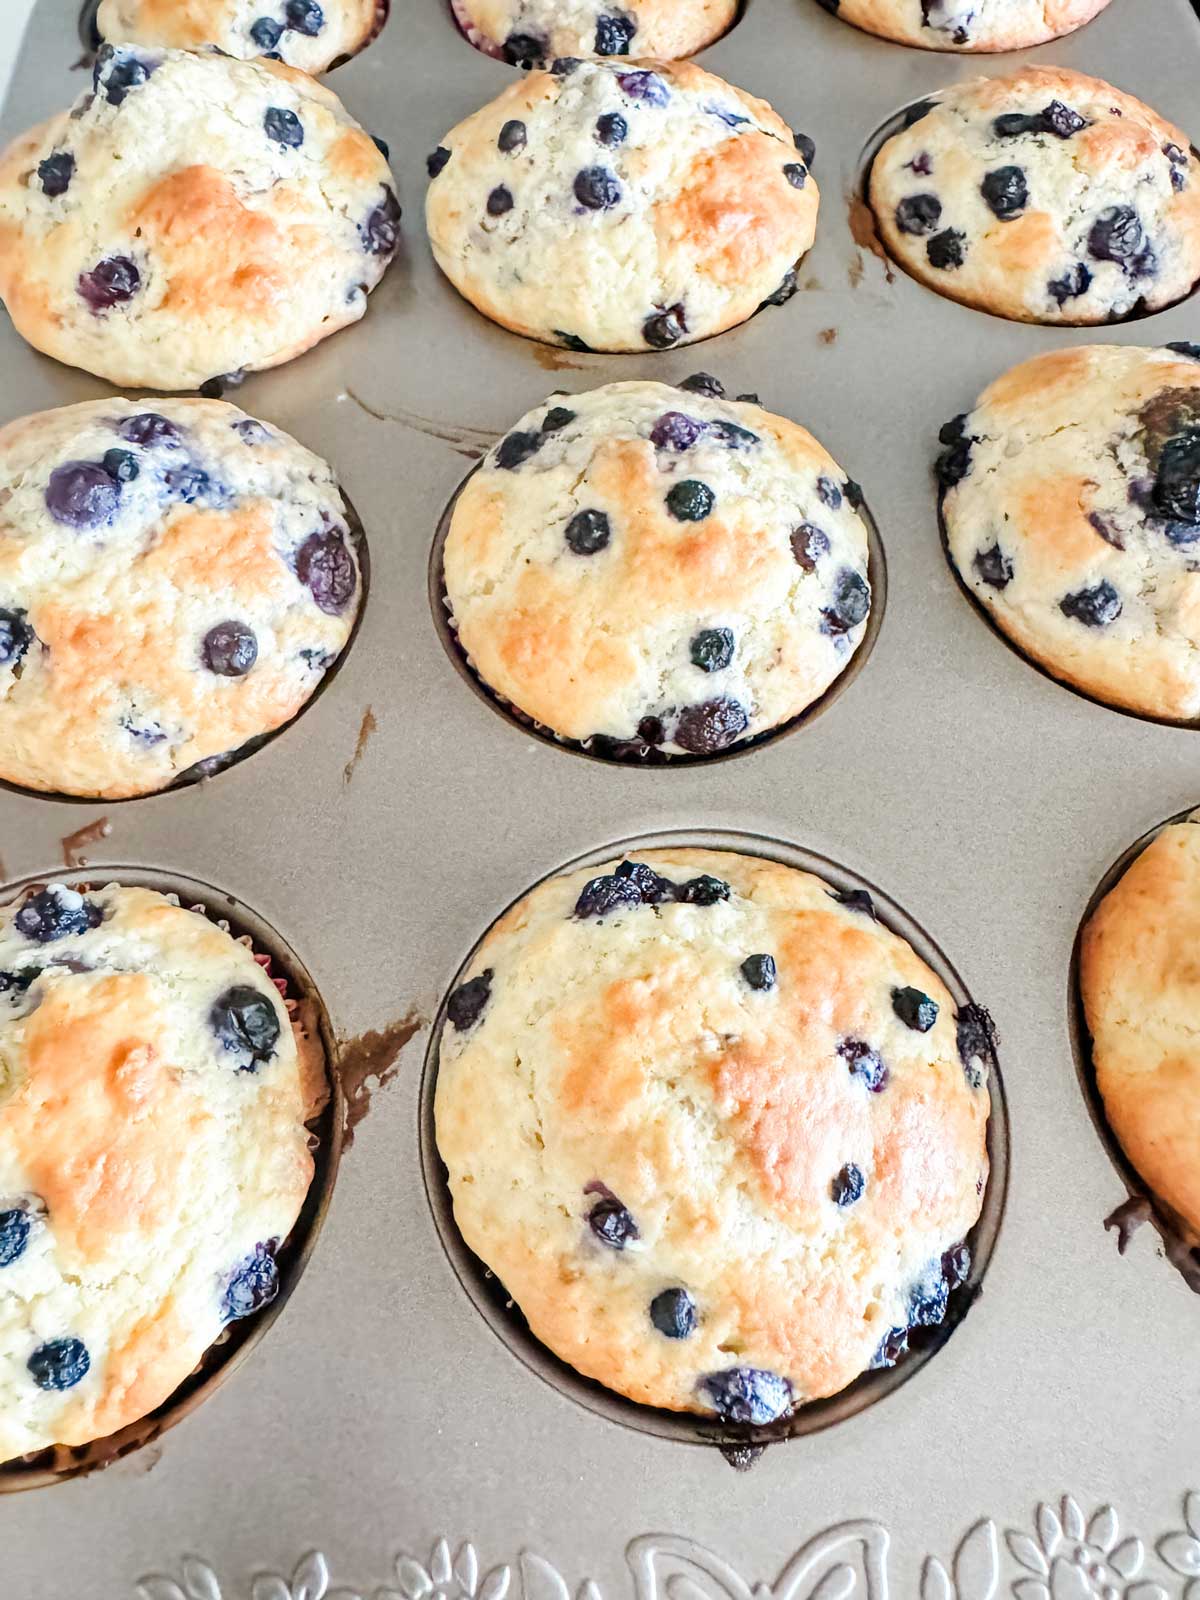 Baked blueberry muffins in a muffin pan.